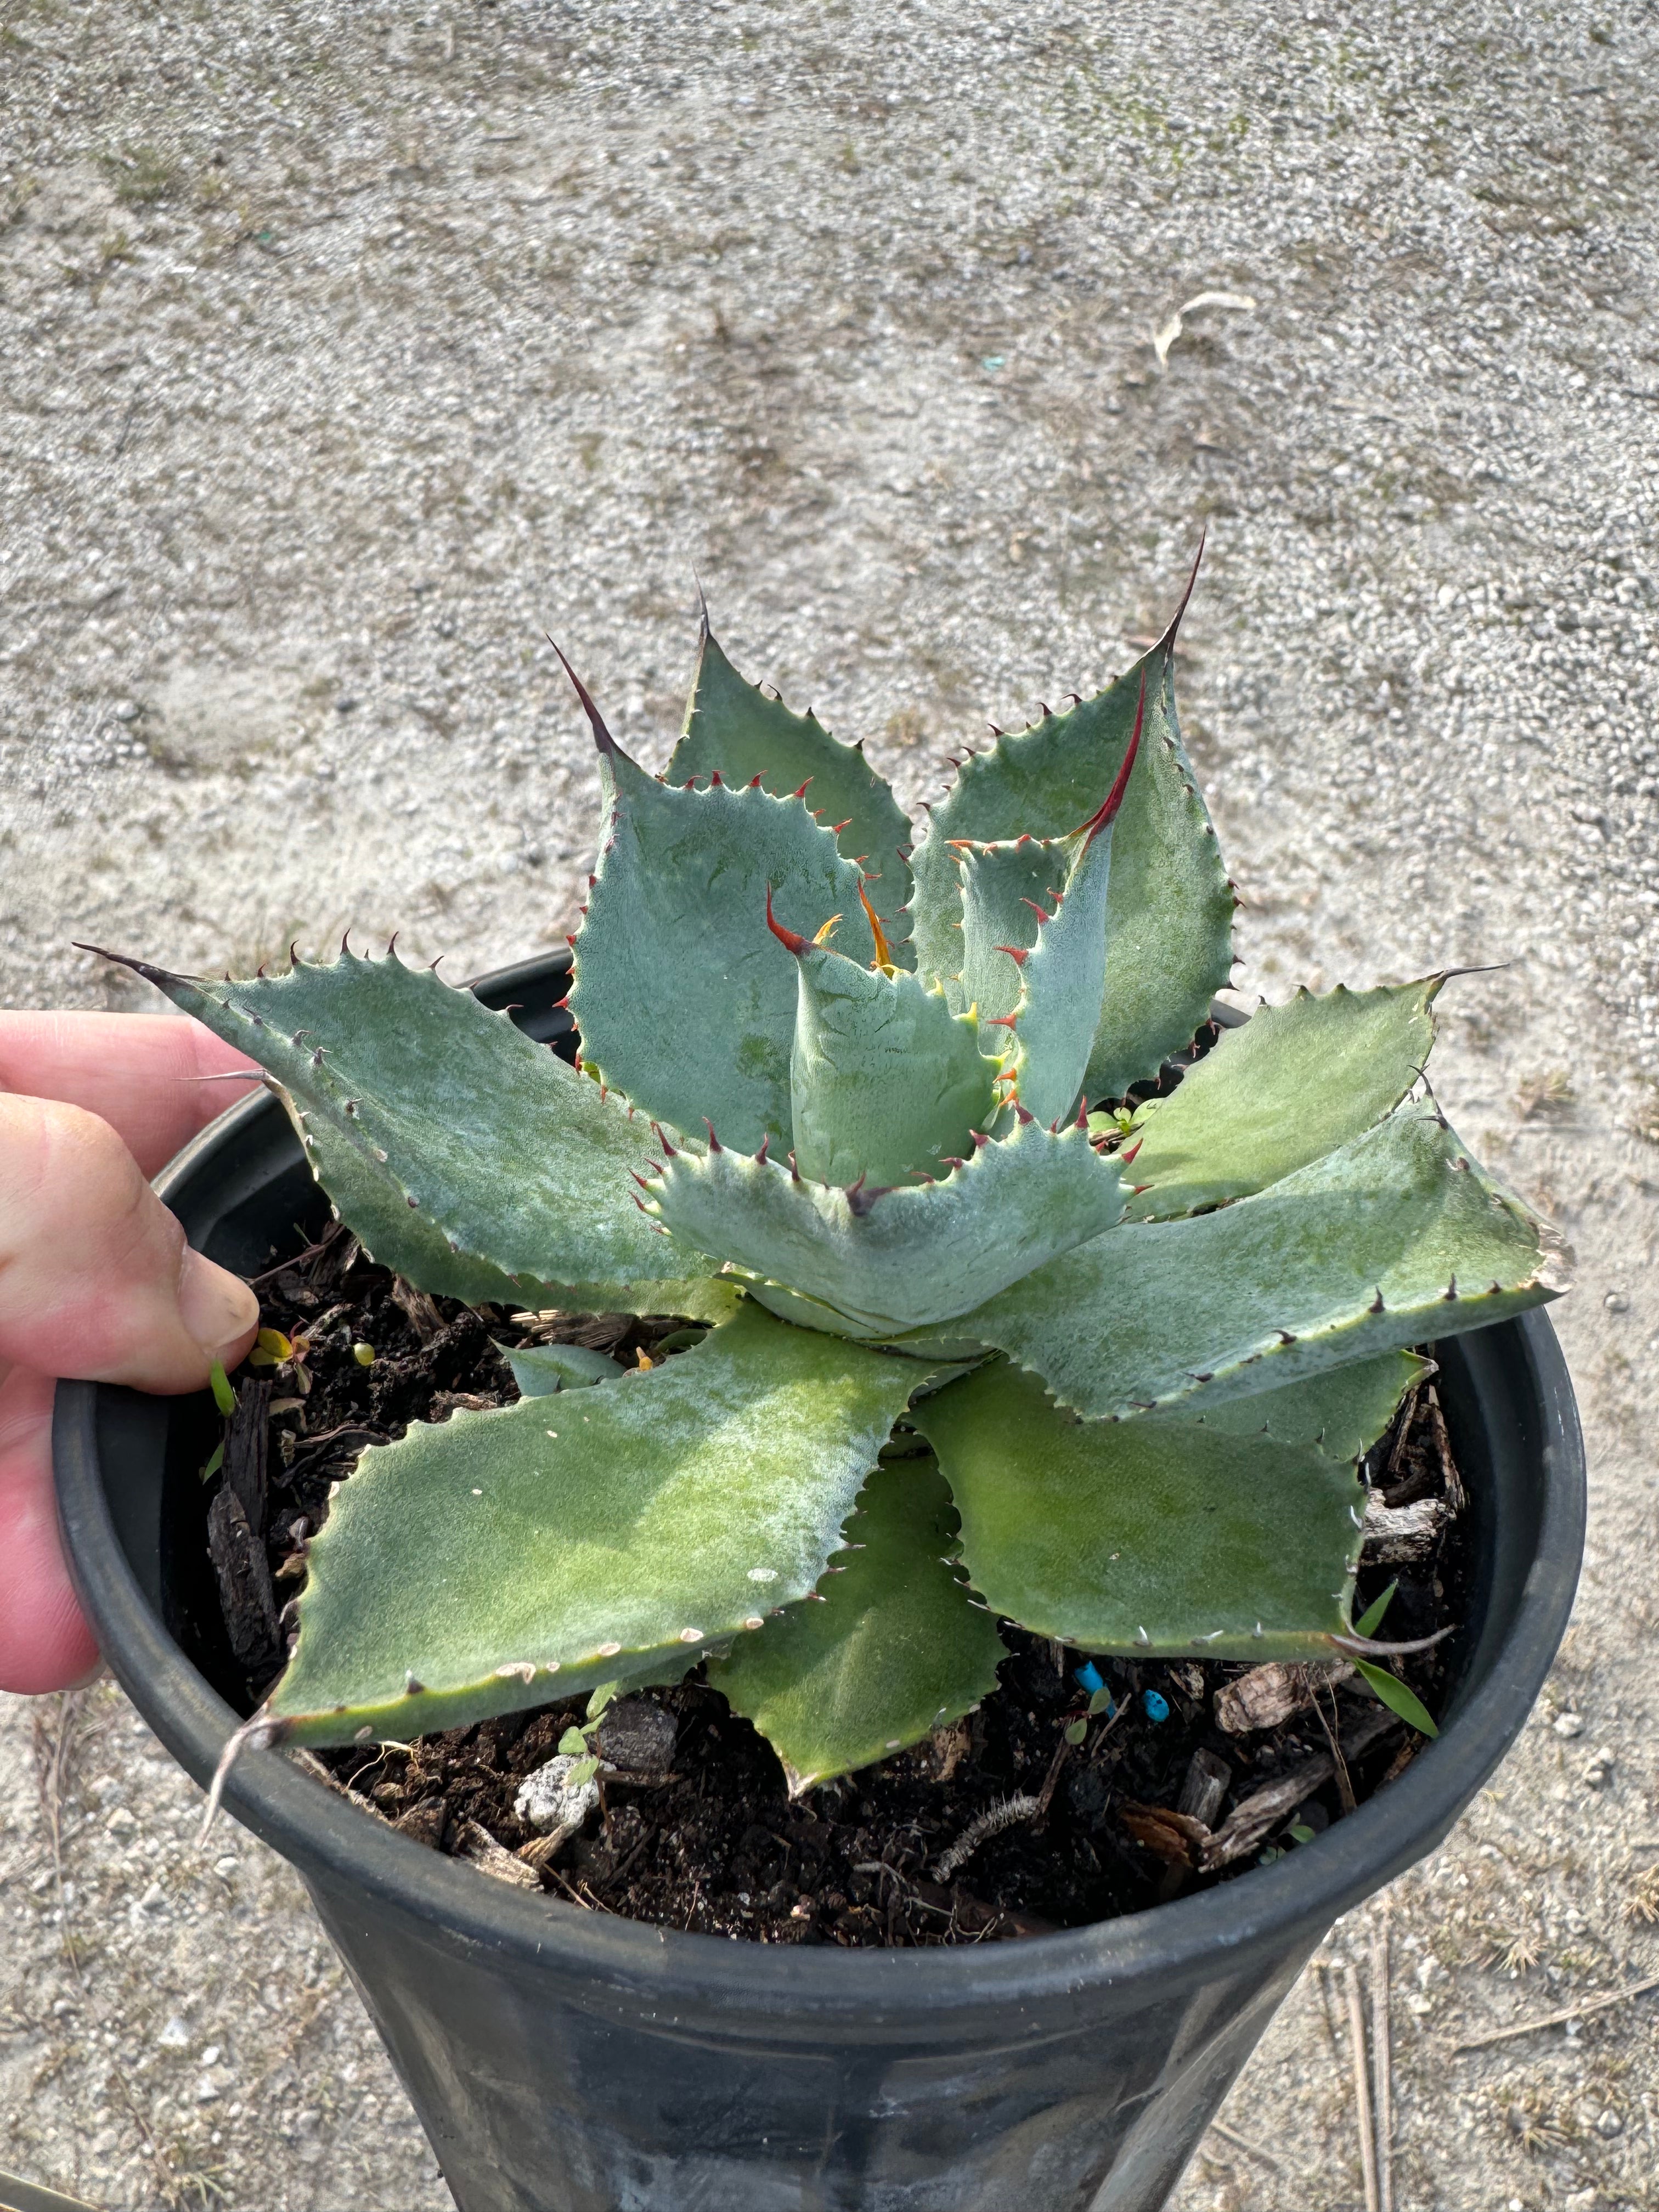 Agave Parryi J.C. Raulston